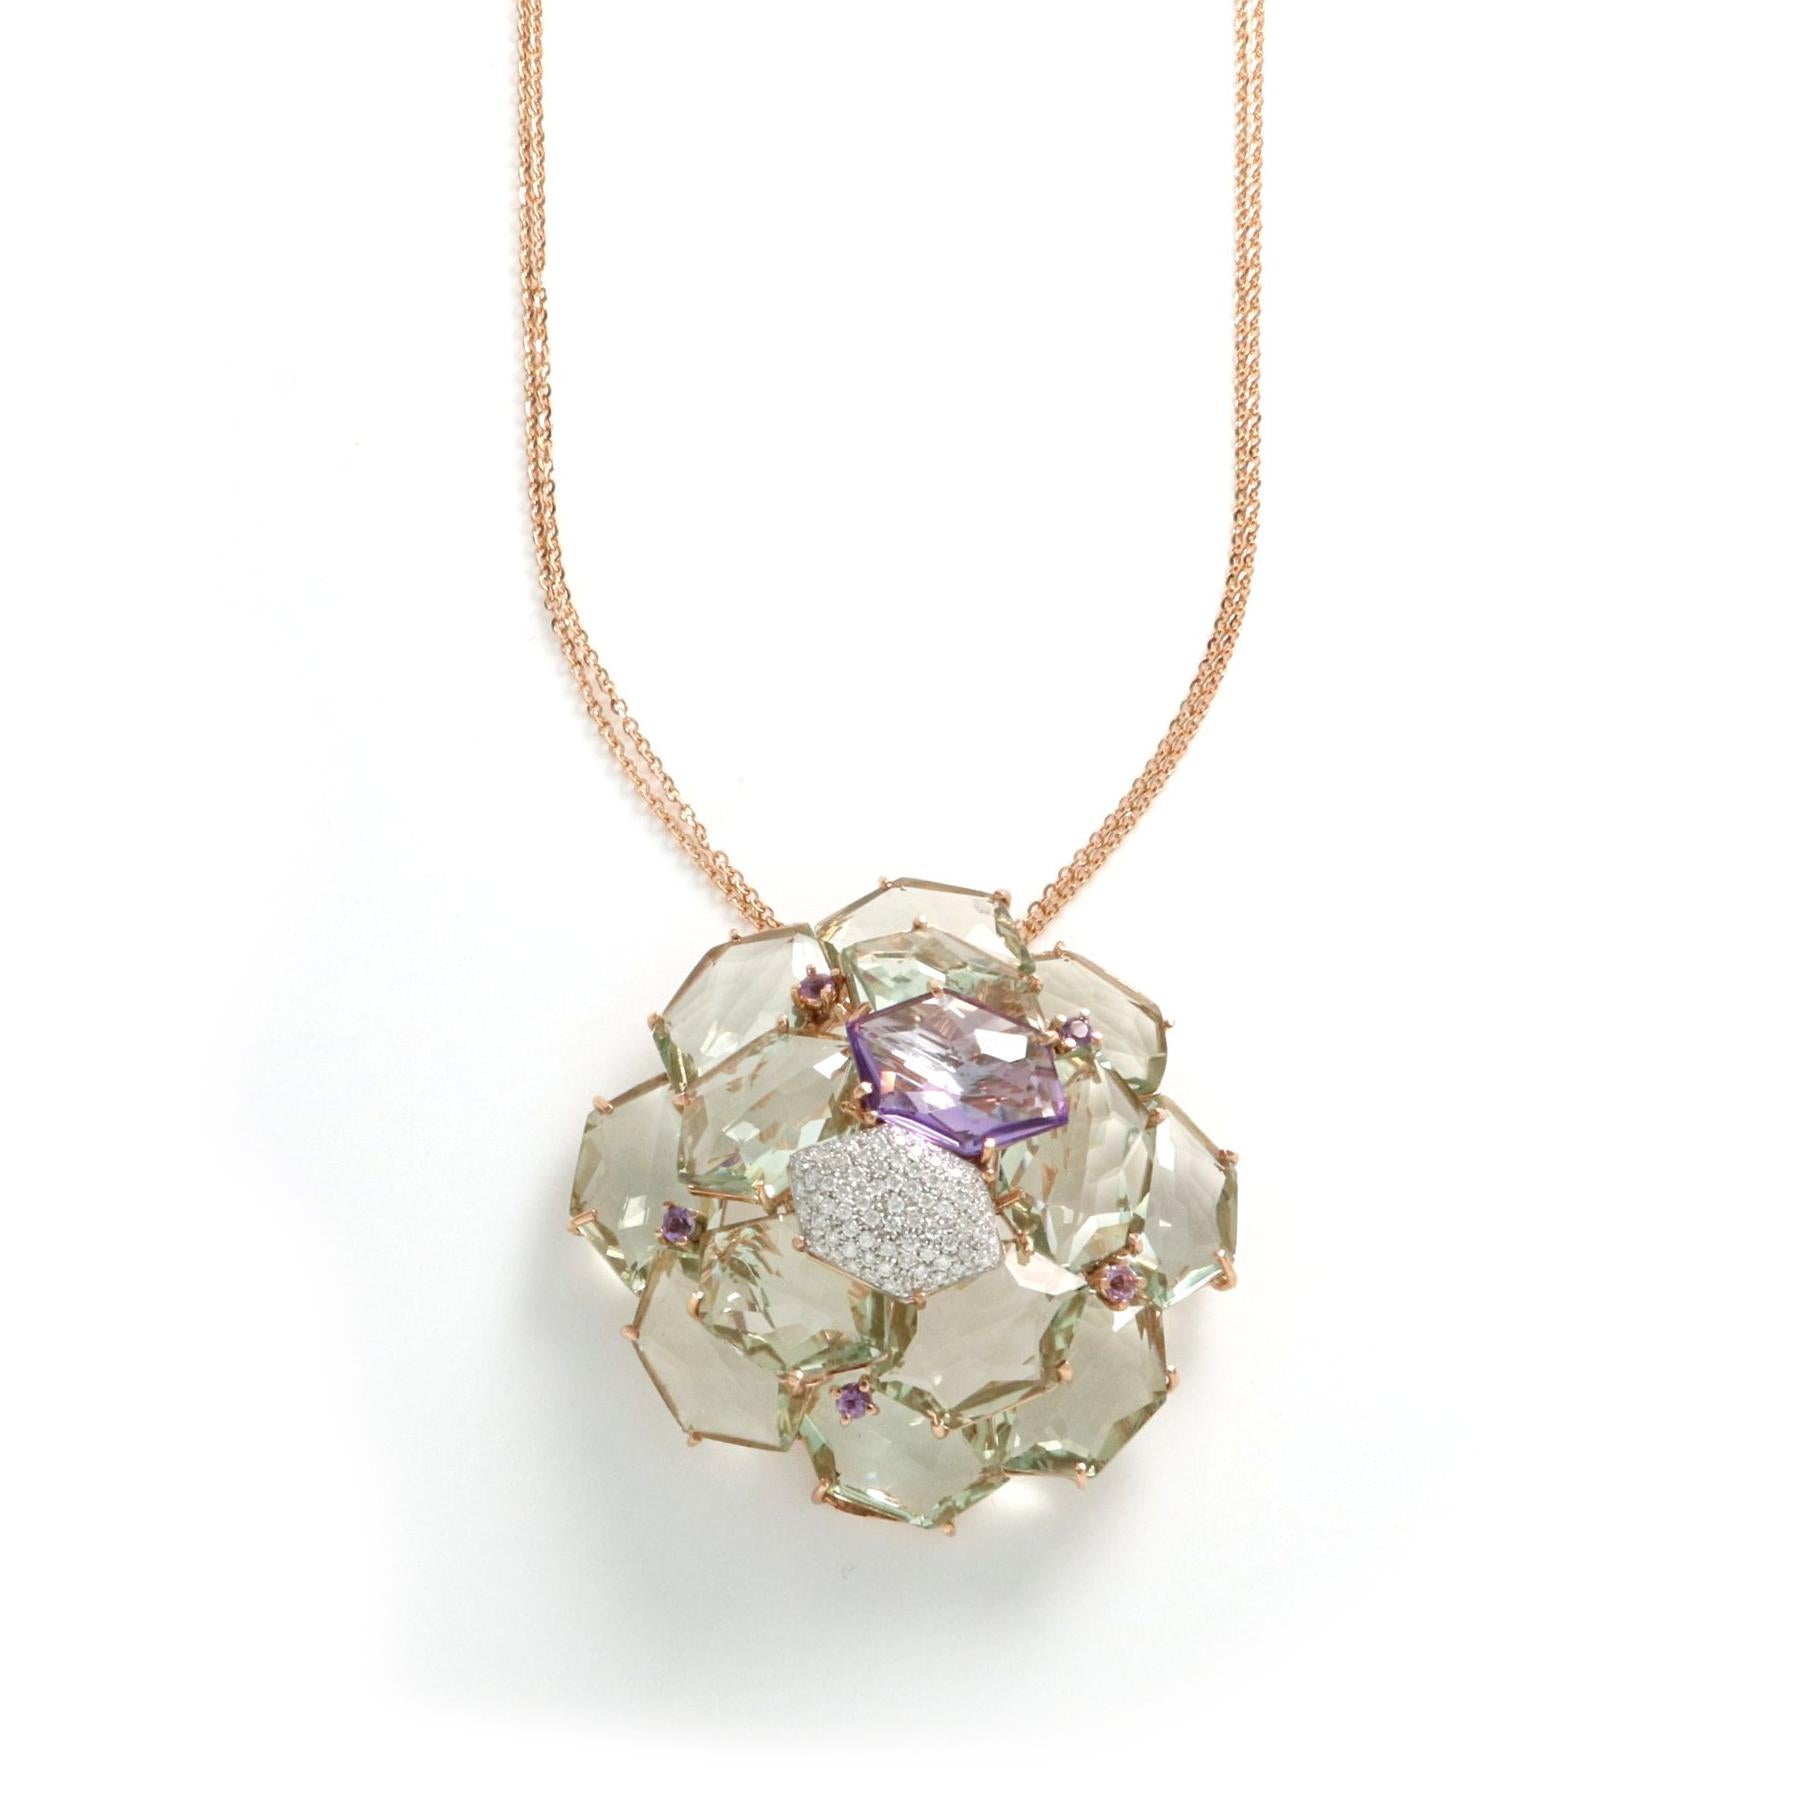 Contemporary 18kt Rose and White Gold Les Gemmes Necklace with Green Amethyst and Diamonds For Sale